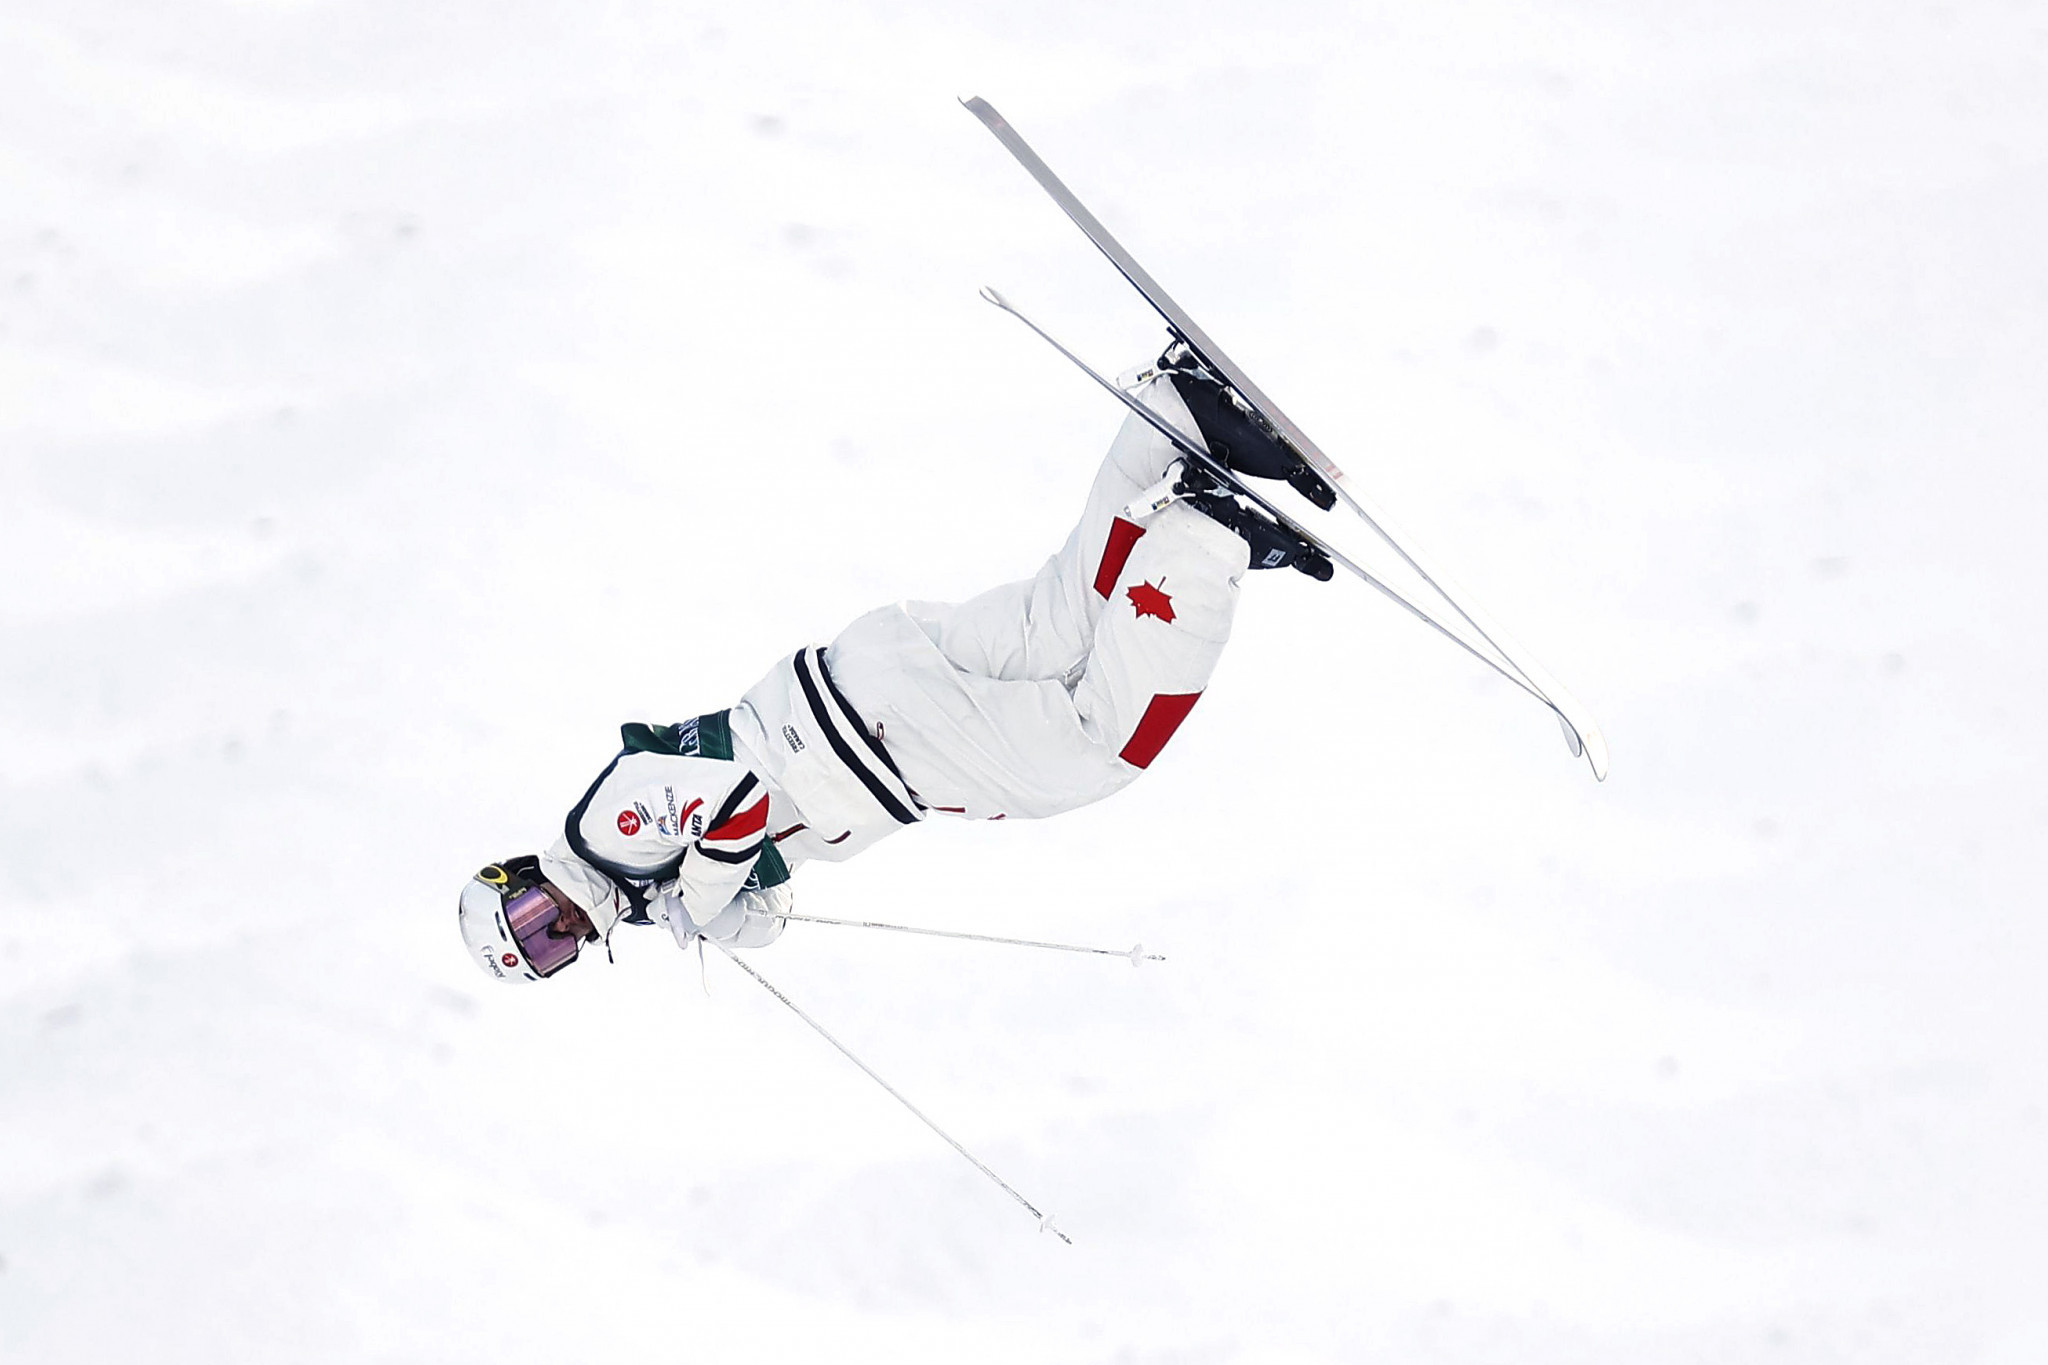 Mikaël Kingsbury did the moguls and dual moguls double in Deer Valley ©Getty Images